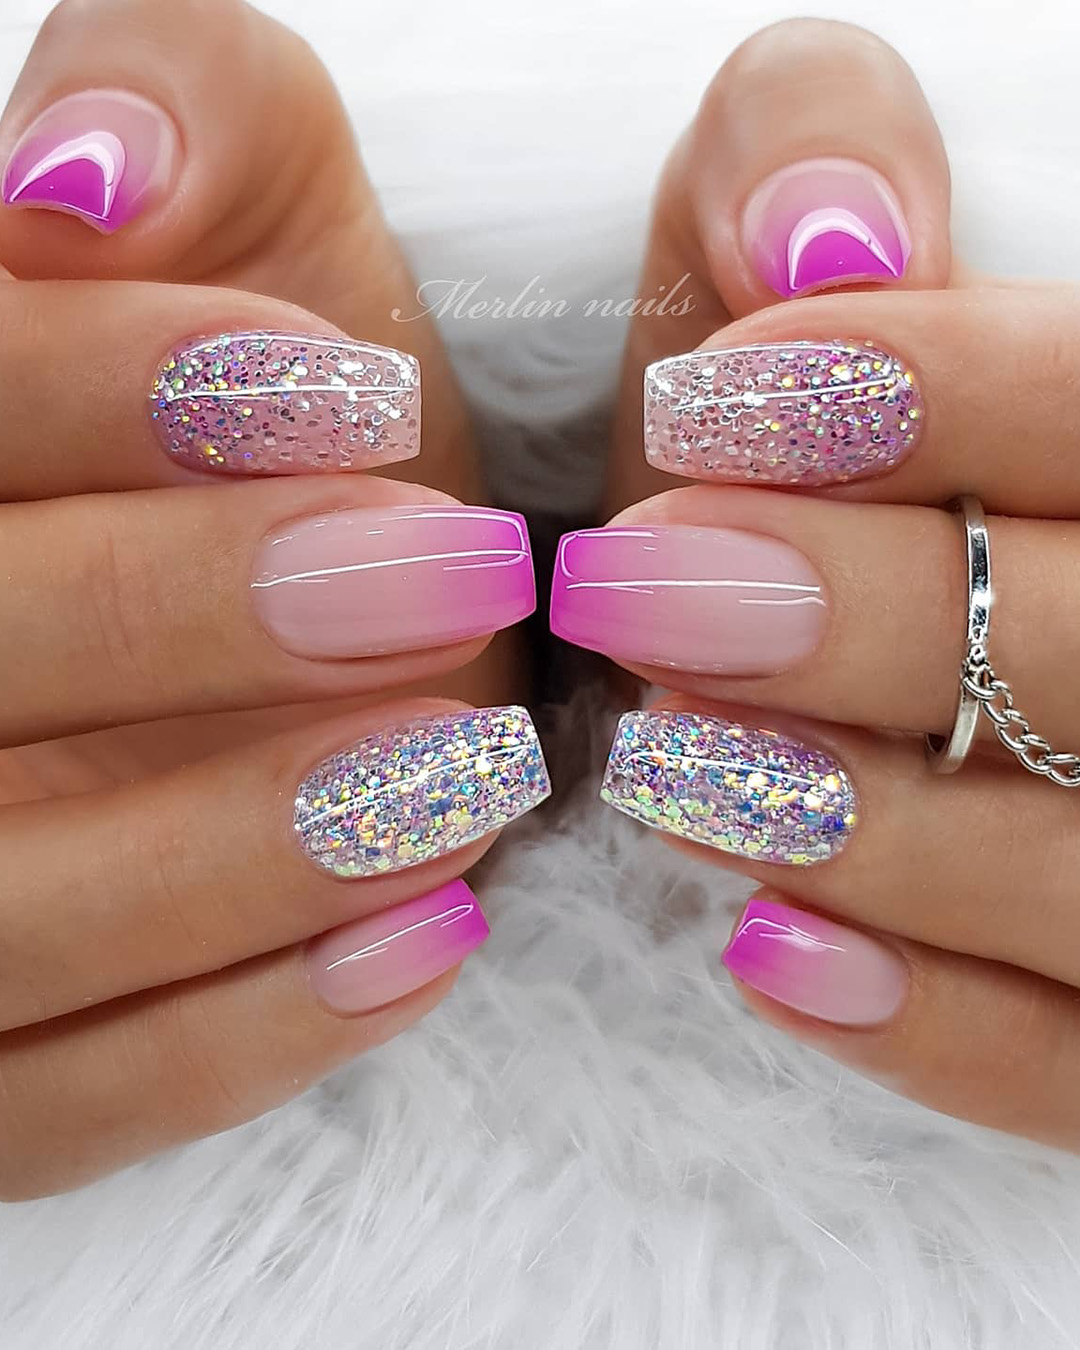 ombre wedding nails bright pink with glitter merlin_nails